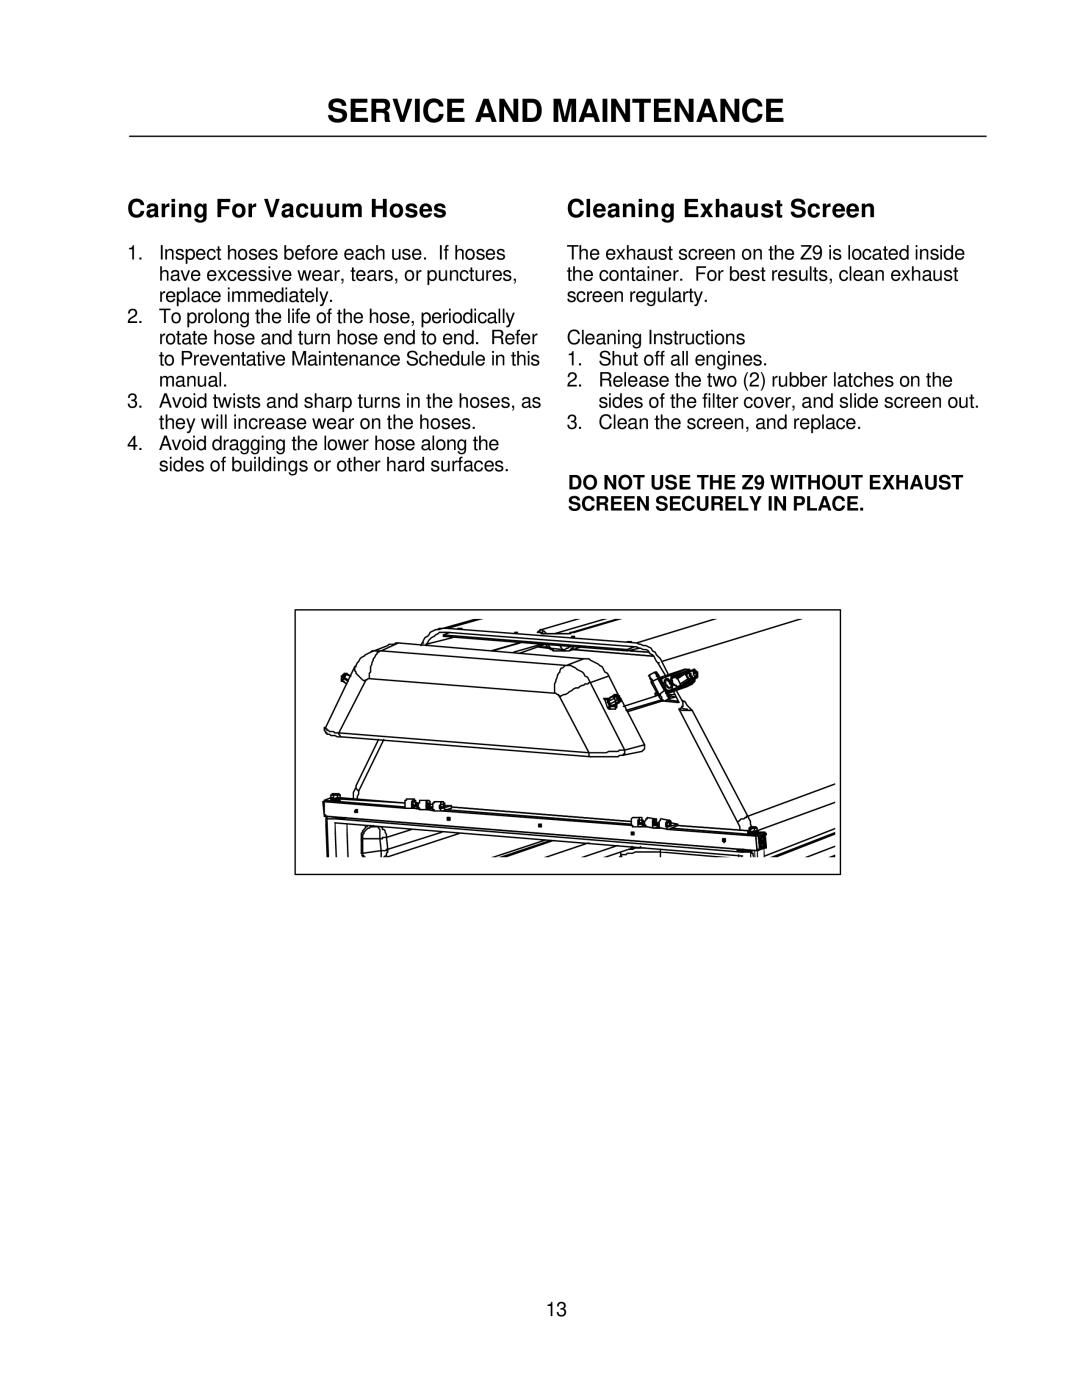 Yazoo/Kees Z9A manual Caring For Vacuum Hoses Cleaning Exhaust Screen 